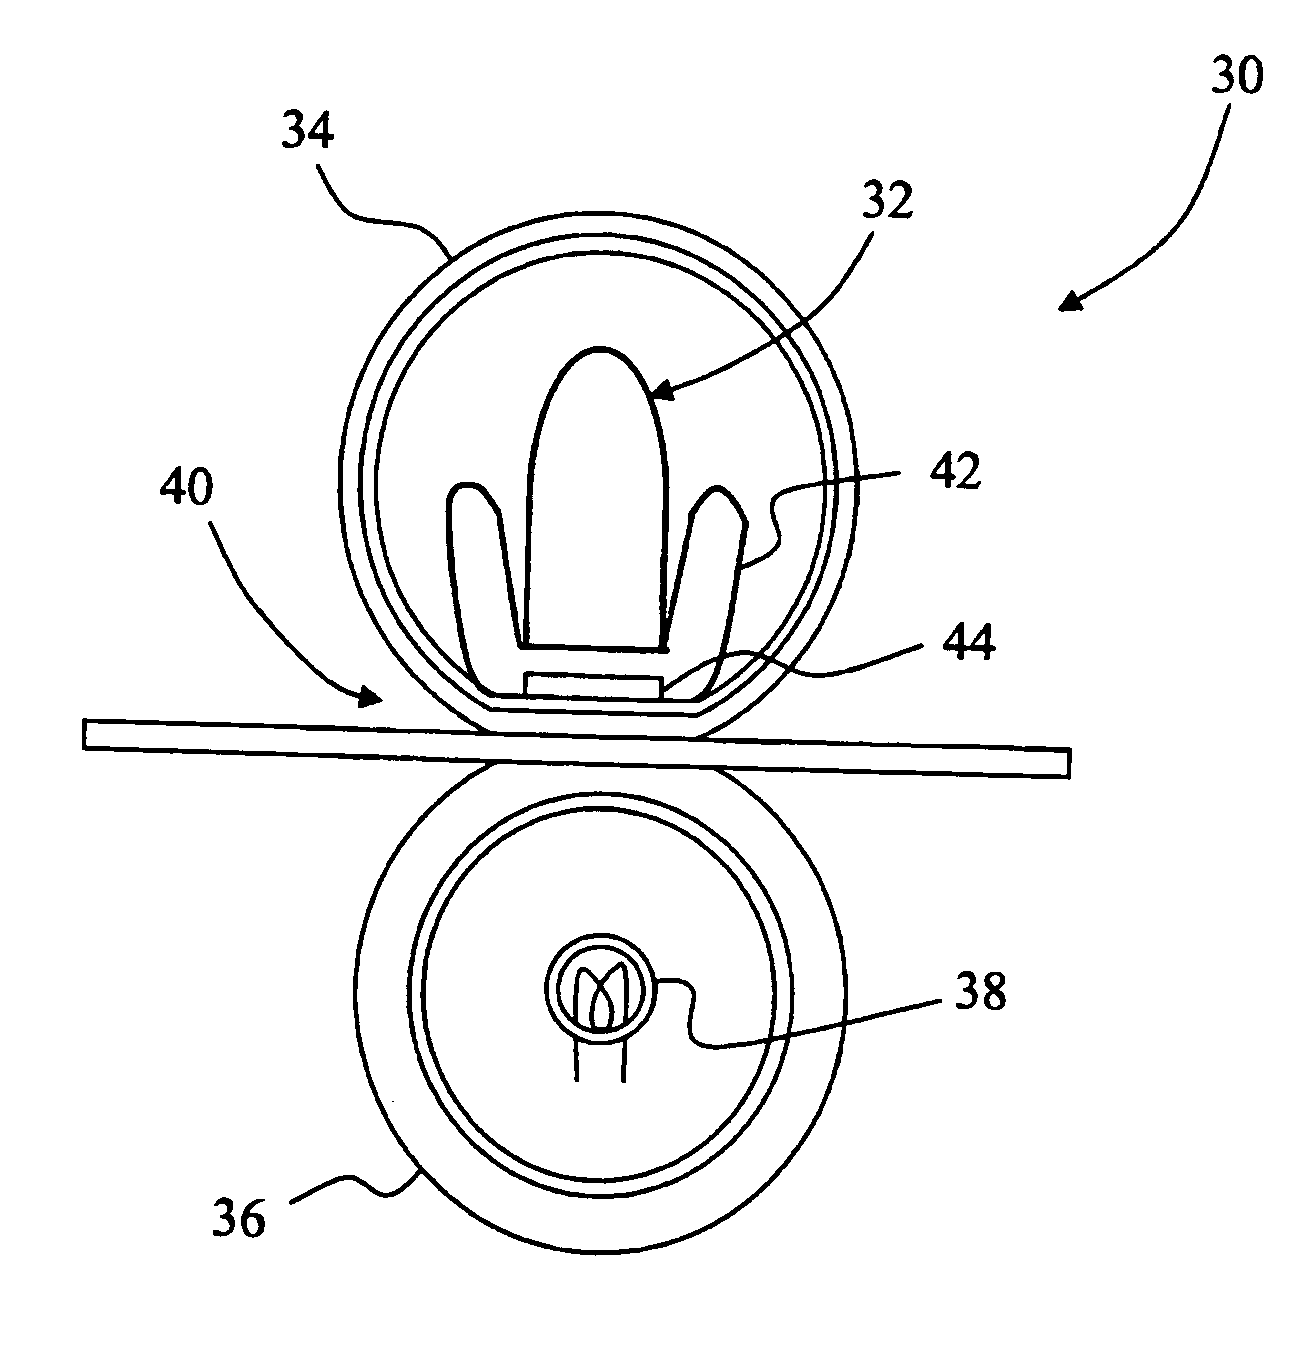 Belt fuser assembly with heated backup roll in an electrophotographic imaging device